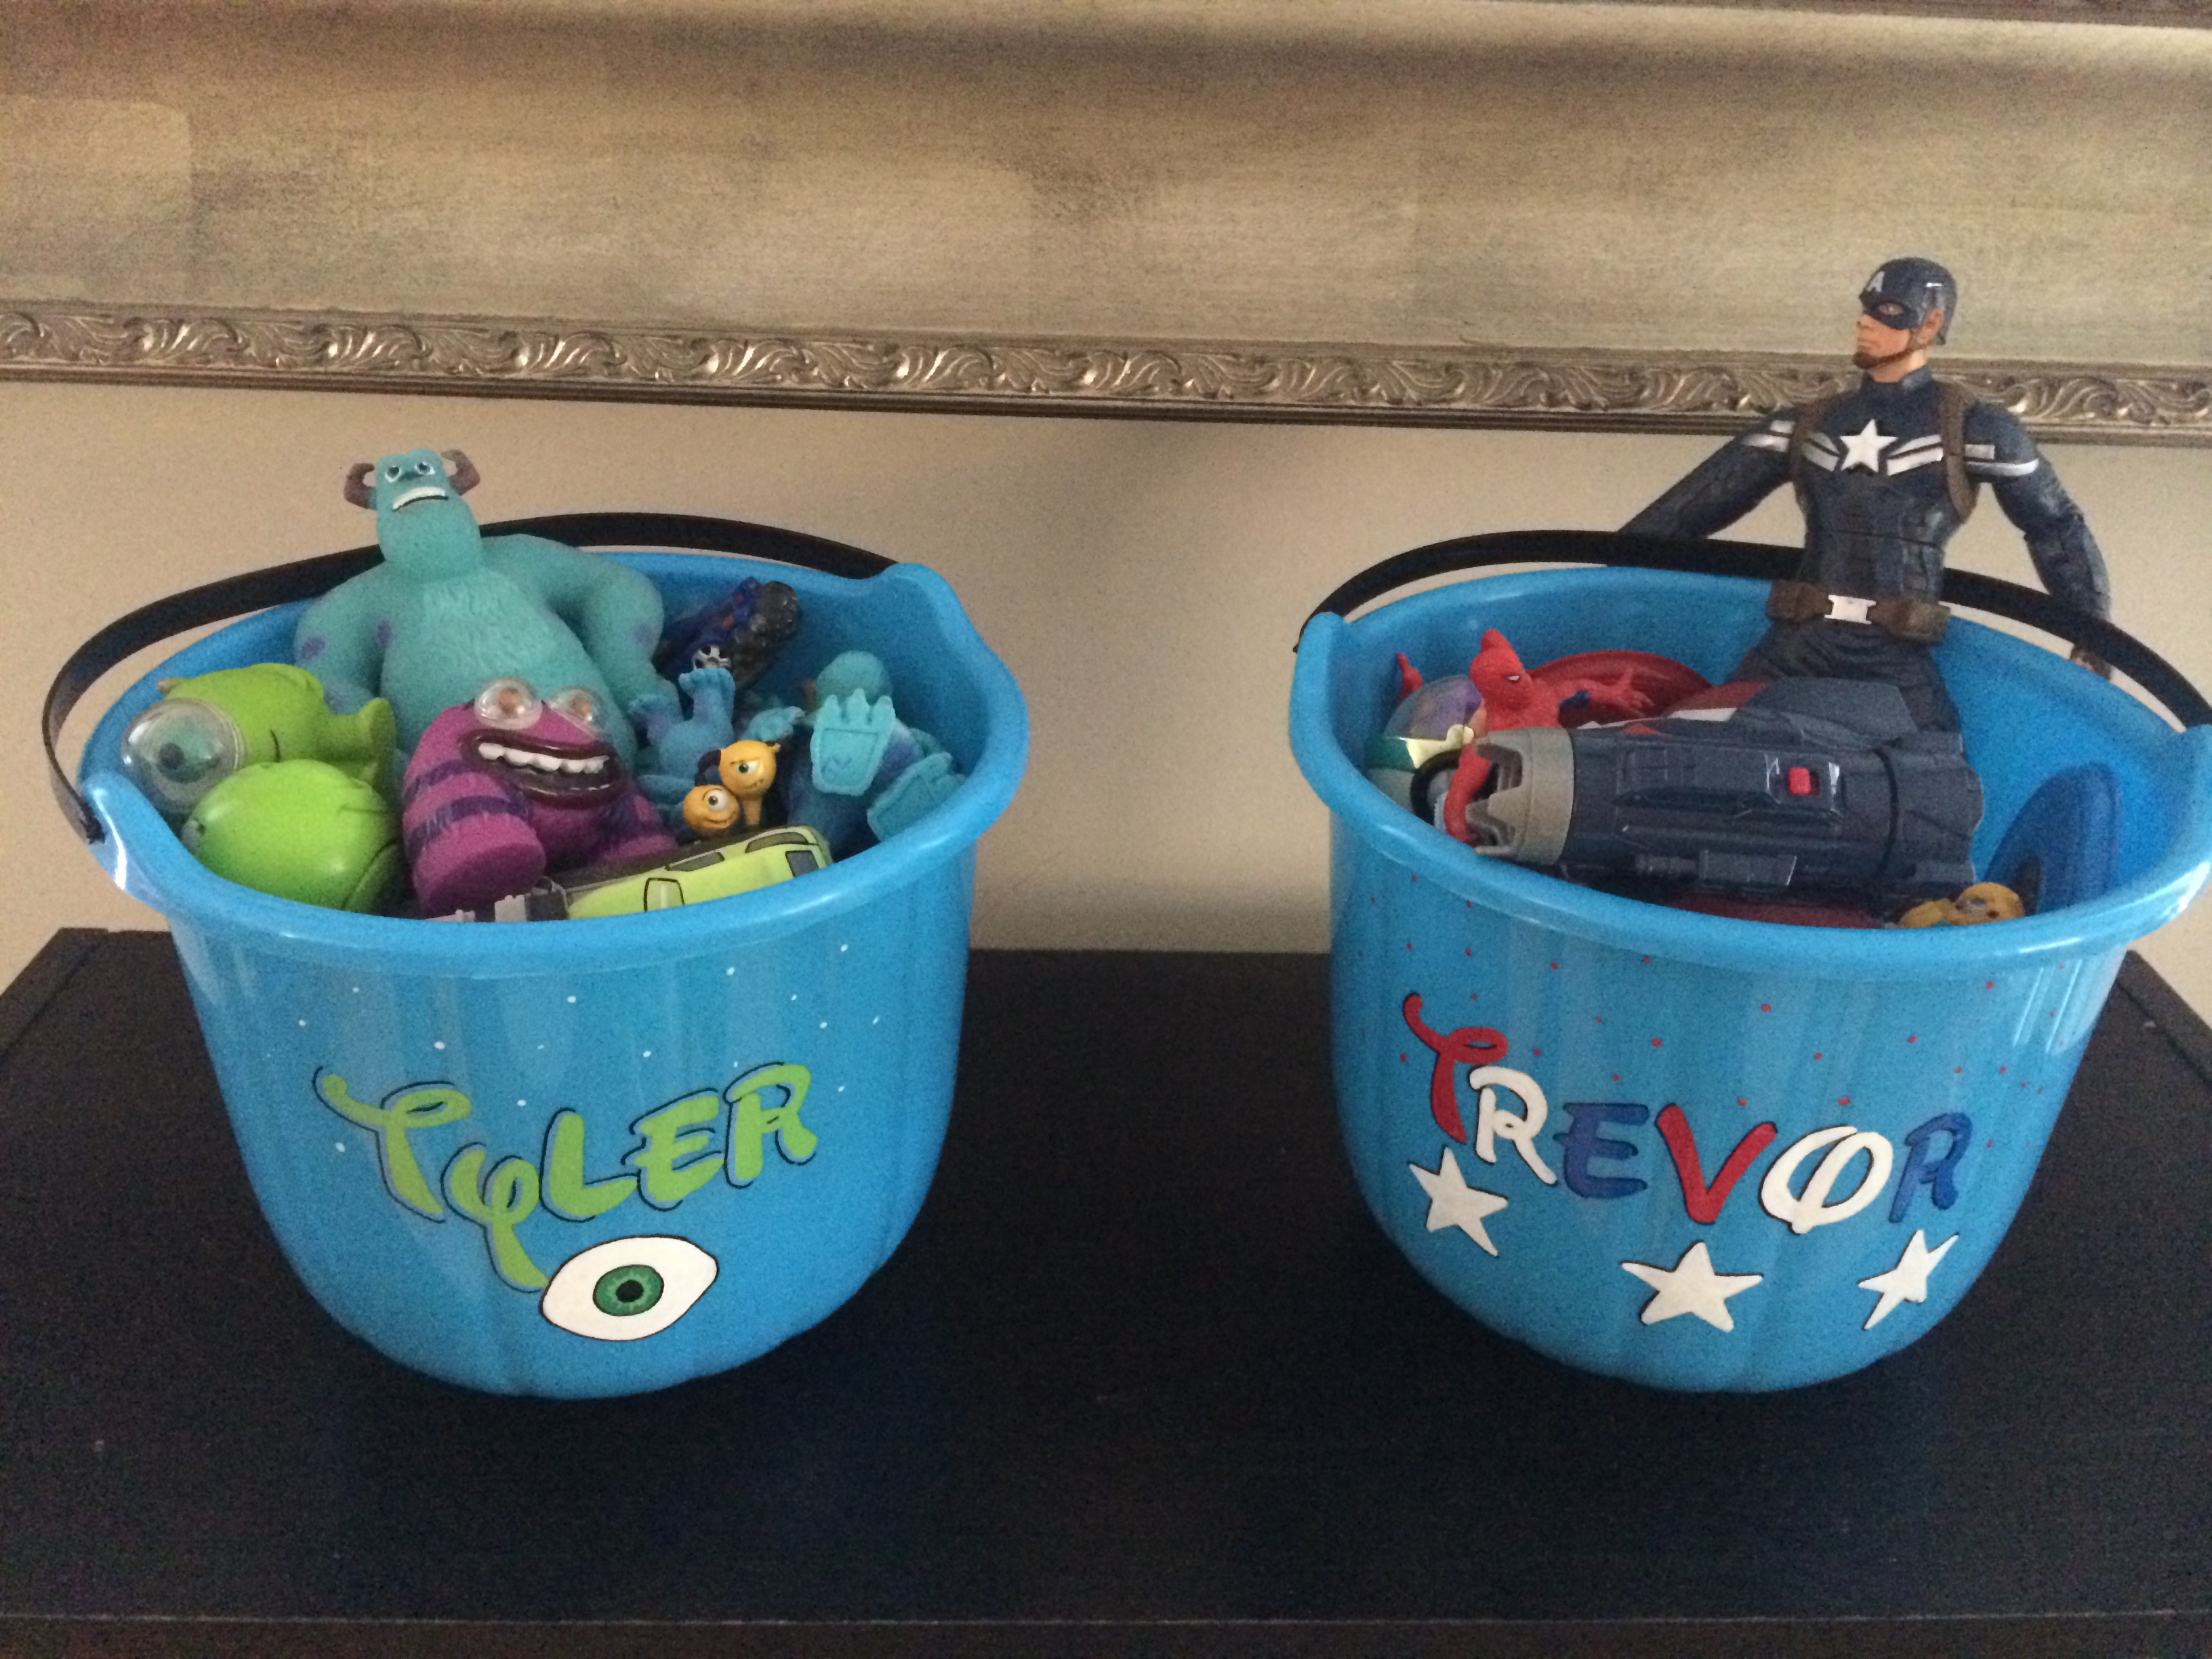 We are using our buckets to story Disney and superhero toys!